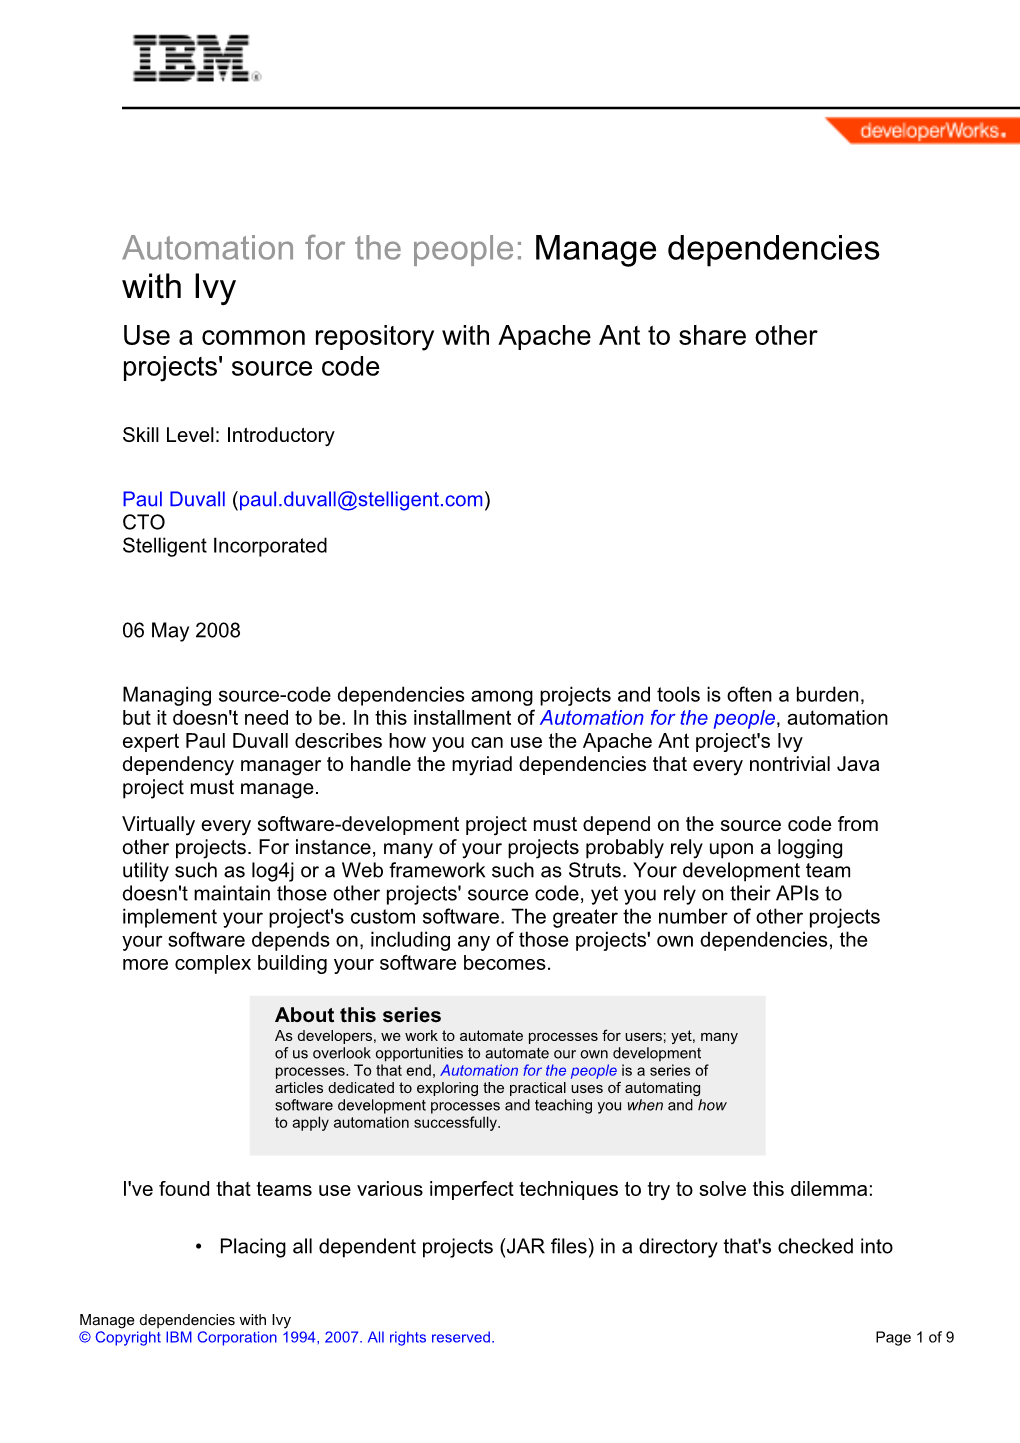 Manage Dependencies with Ivy Use a Common Repository with Apache Ant to Share Other Projects' Source Code